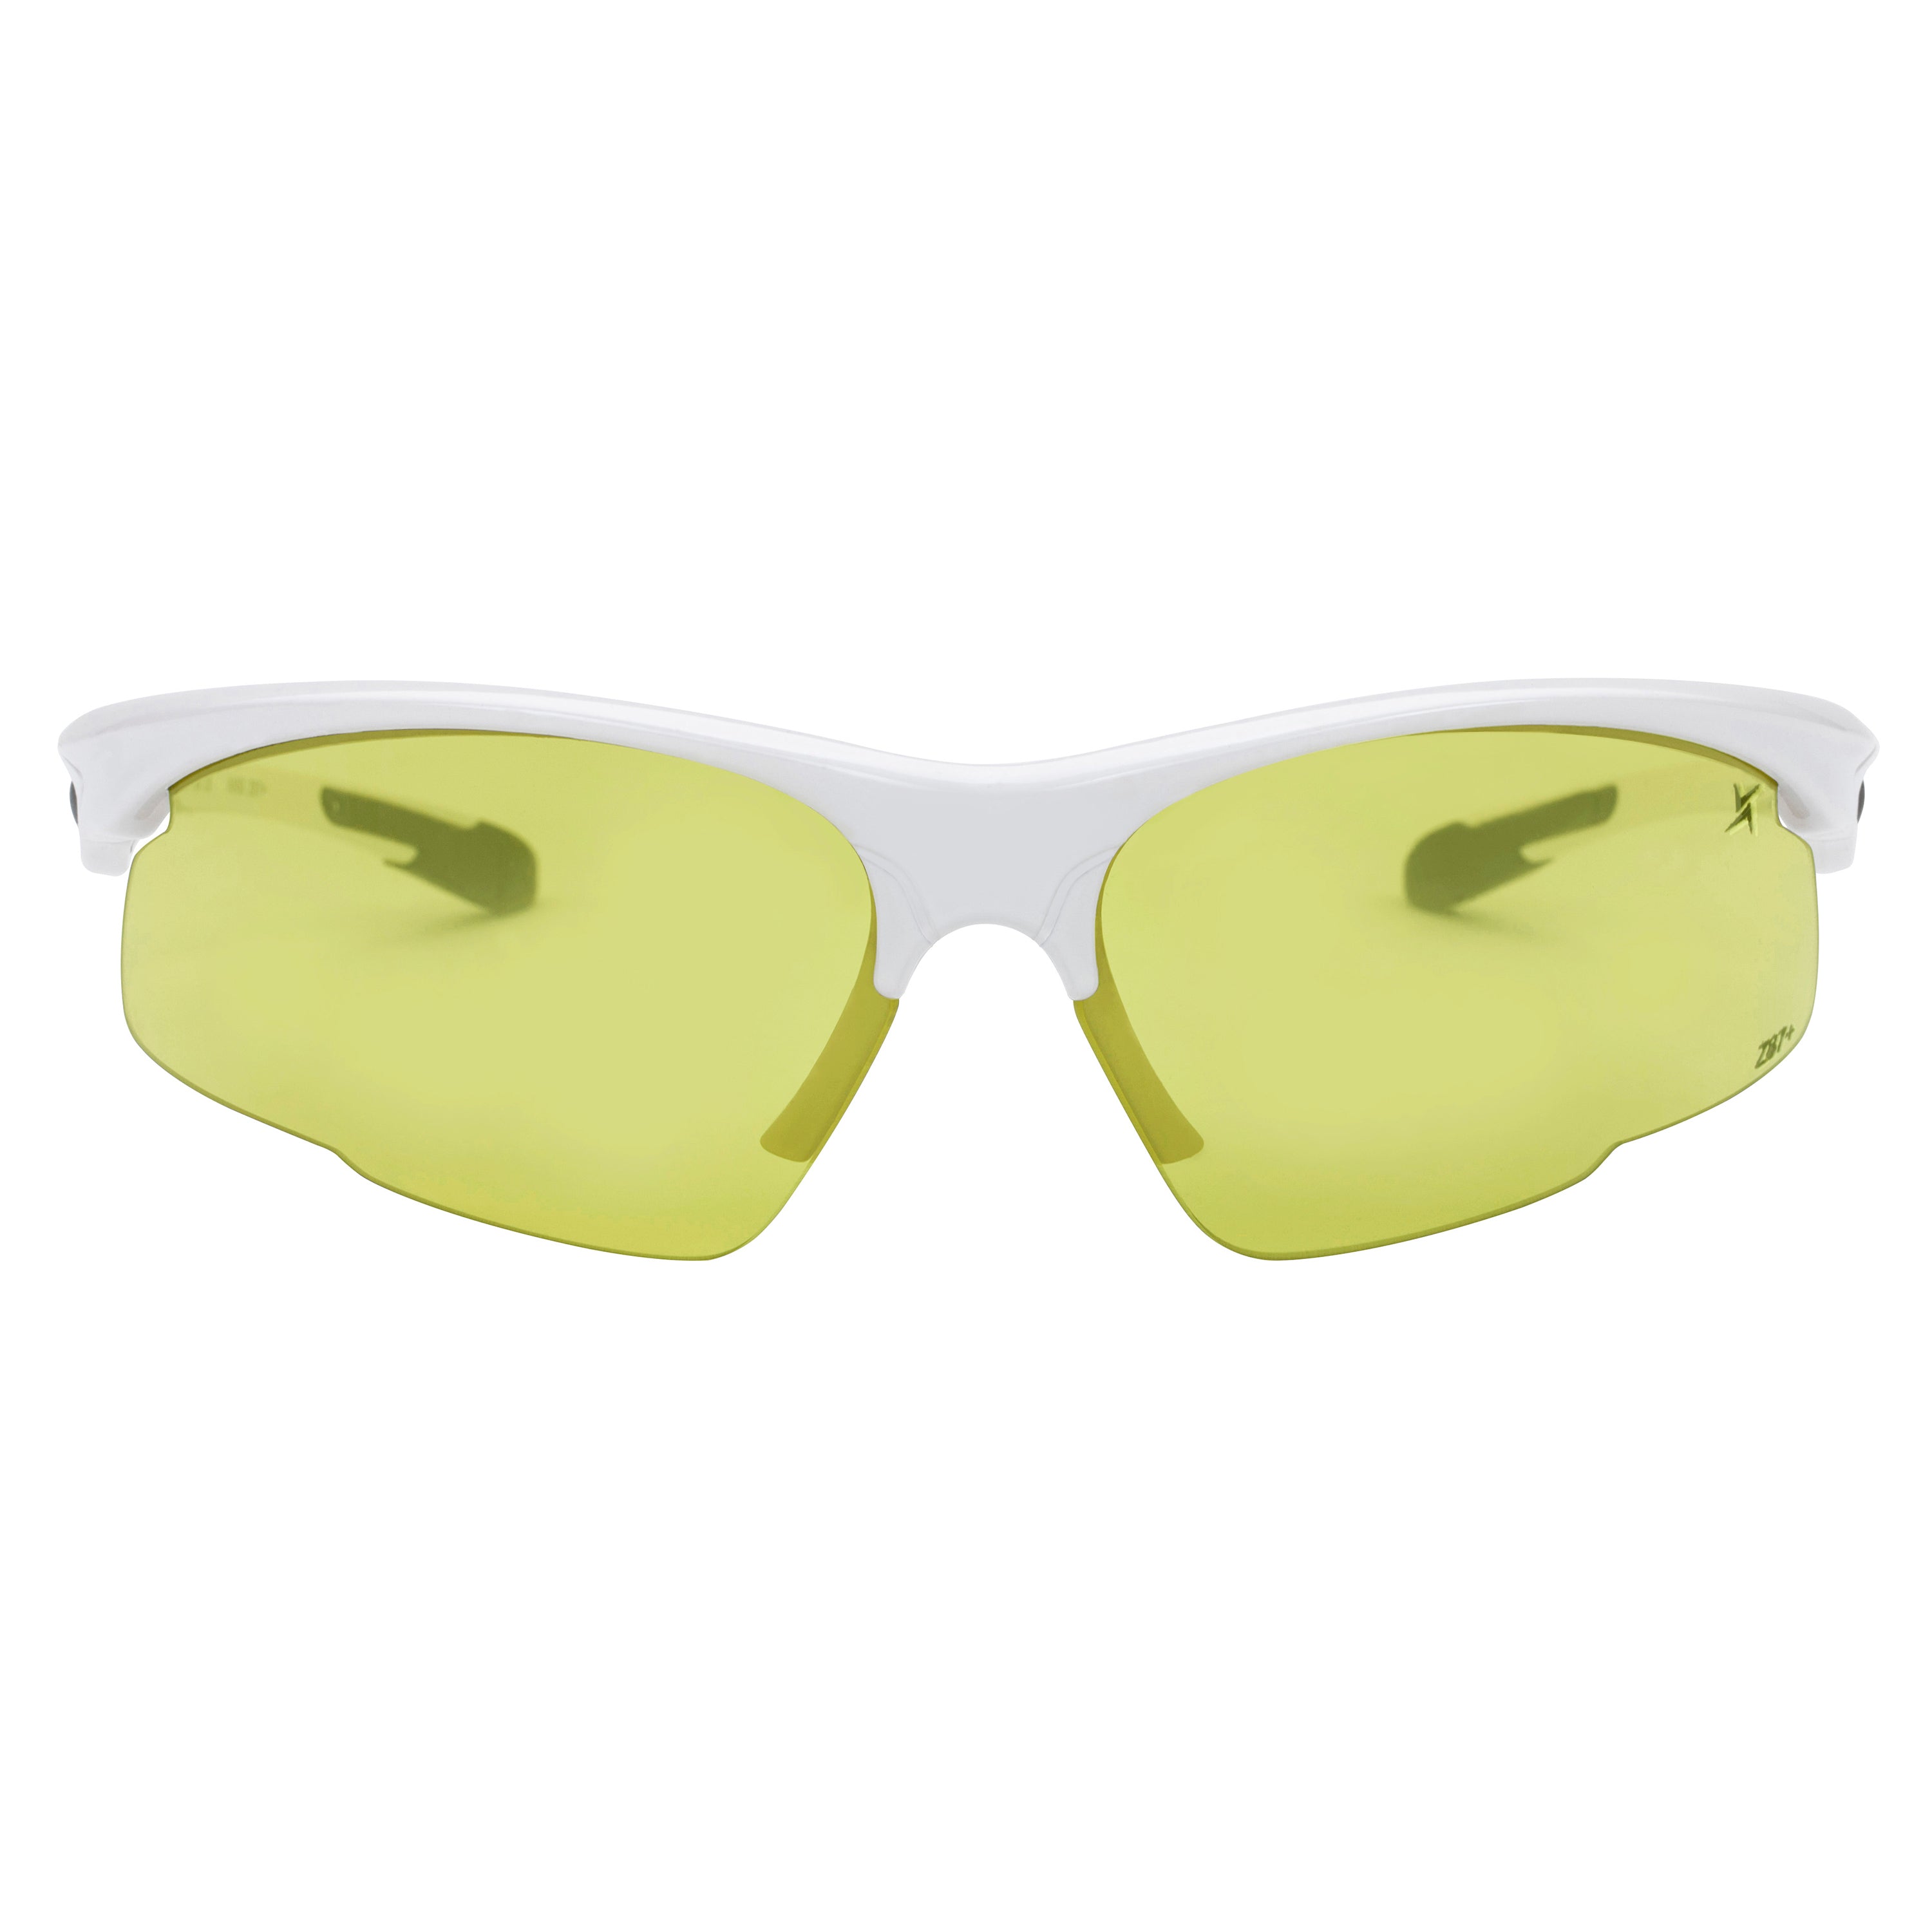 Yellow to Grey Photochromic Lens with Flash Mirror Coating White Half Frame Wrap Around Sport Safety Sunglasses.